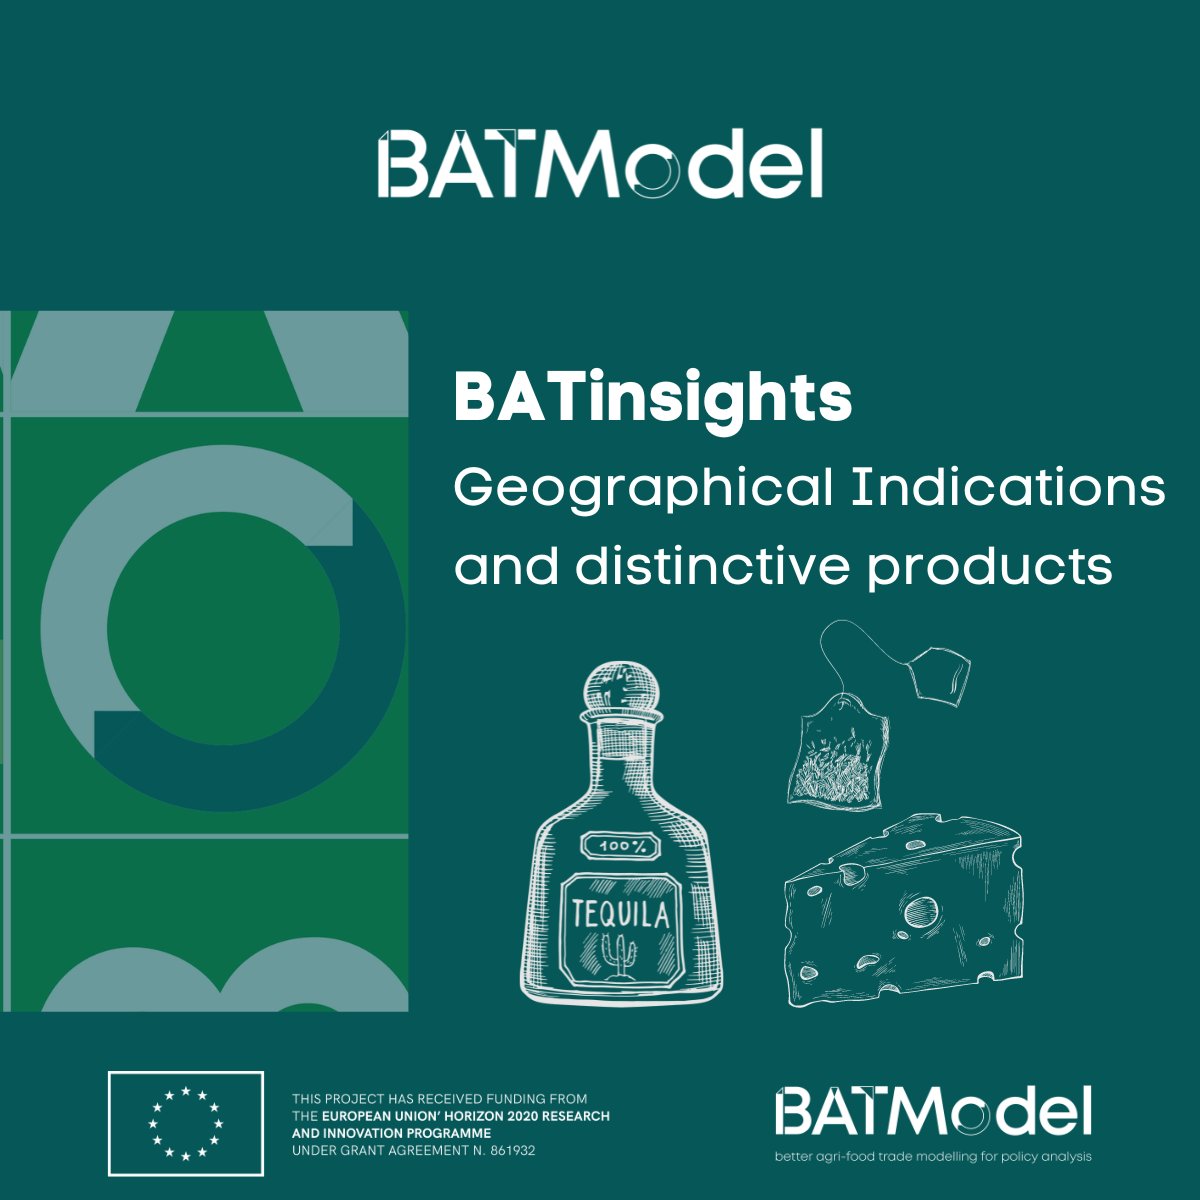 🌍 #GeographicalIndications make a world of distinctive products!

🏆 Think Champagne (#France), Parmigiano-Reggiano cheese (#Italy), Tequila (#Mexico), Darjeeling tea (#India) and Roquefort cheese (#France).

batmodel.eu

#GeographicalIndications #CulinaryHeritage